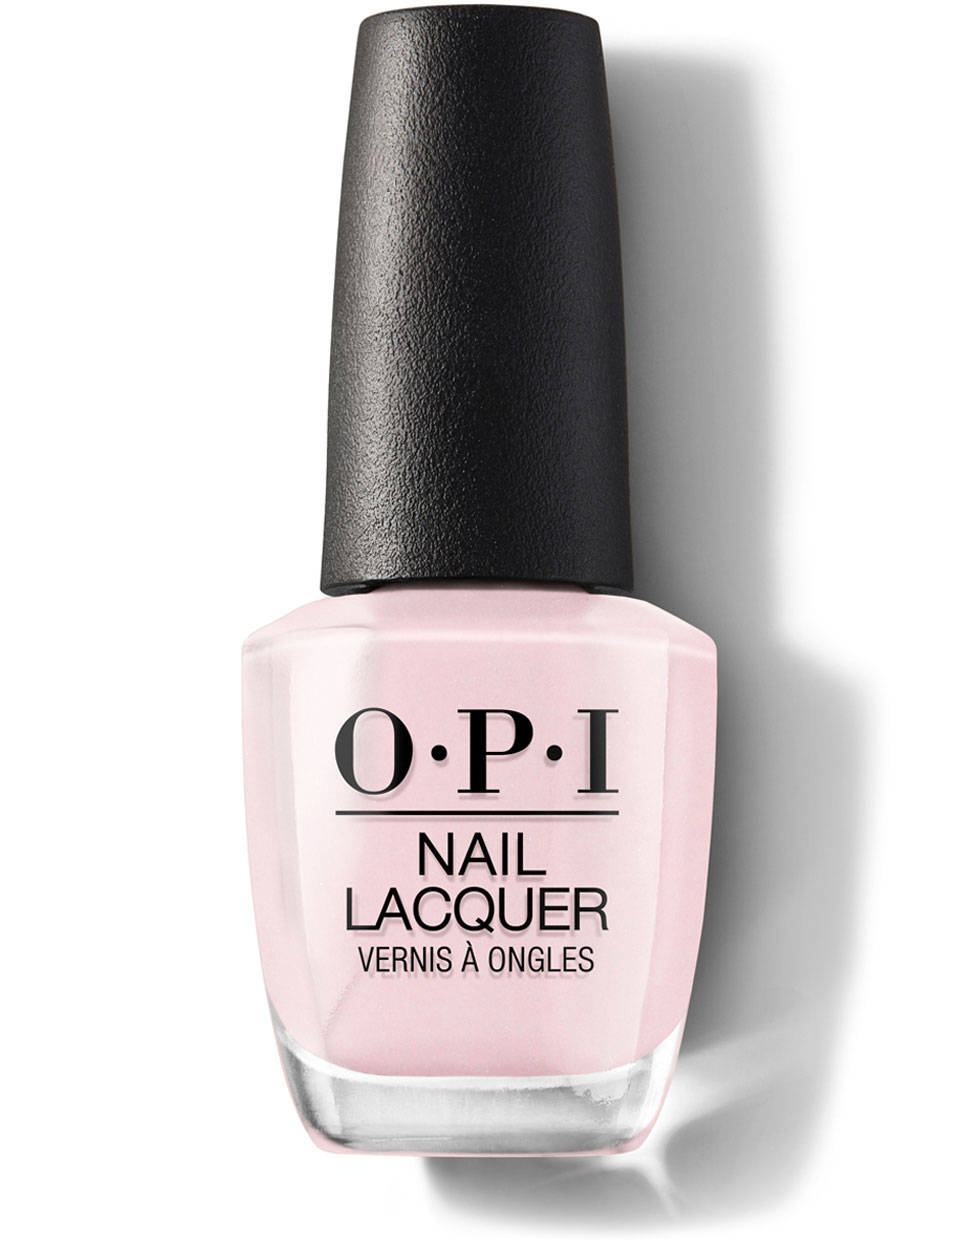 Let Me Bayou a Drink - Nail Lacquer | OPI